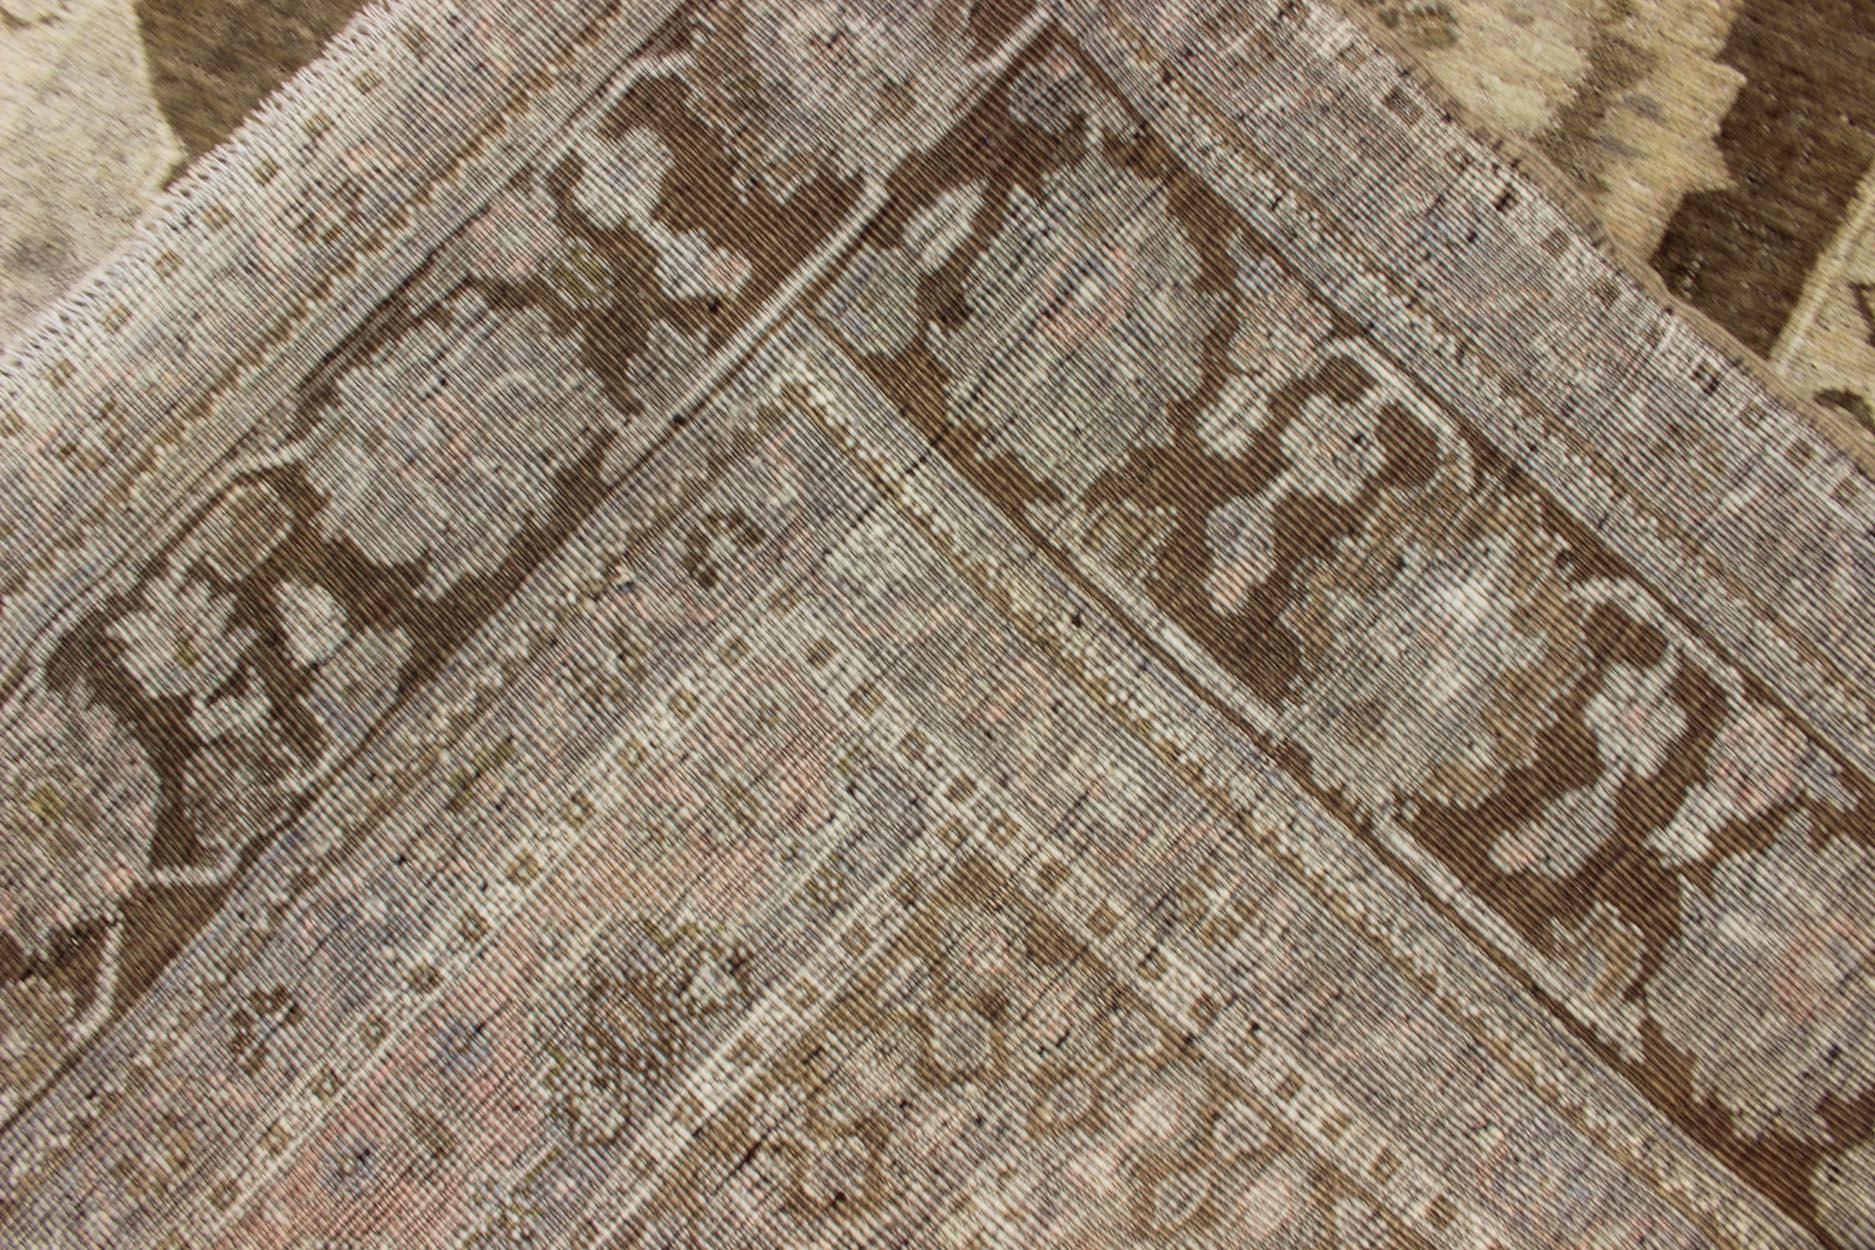 Mid-20th Century Vintage Turkish Oushak Rug in Brown/Green, Taupe and Neutral Colors For Sale